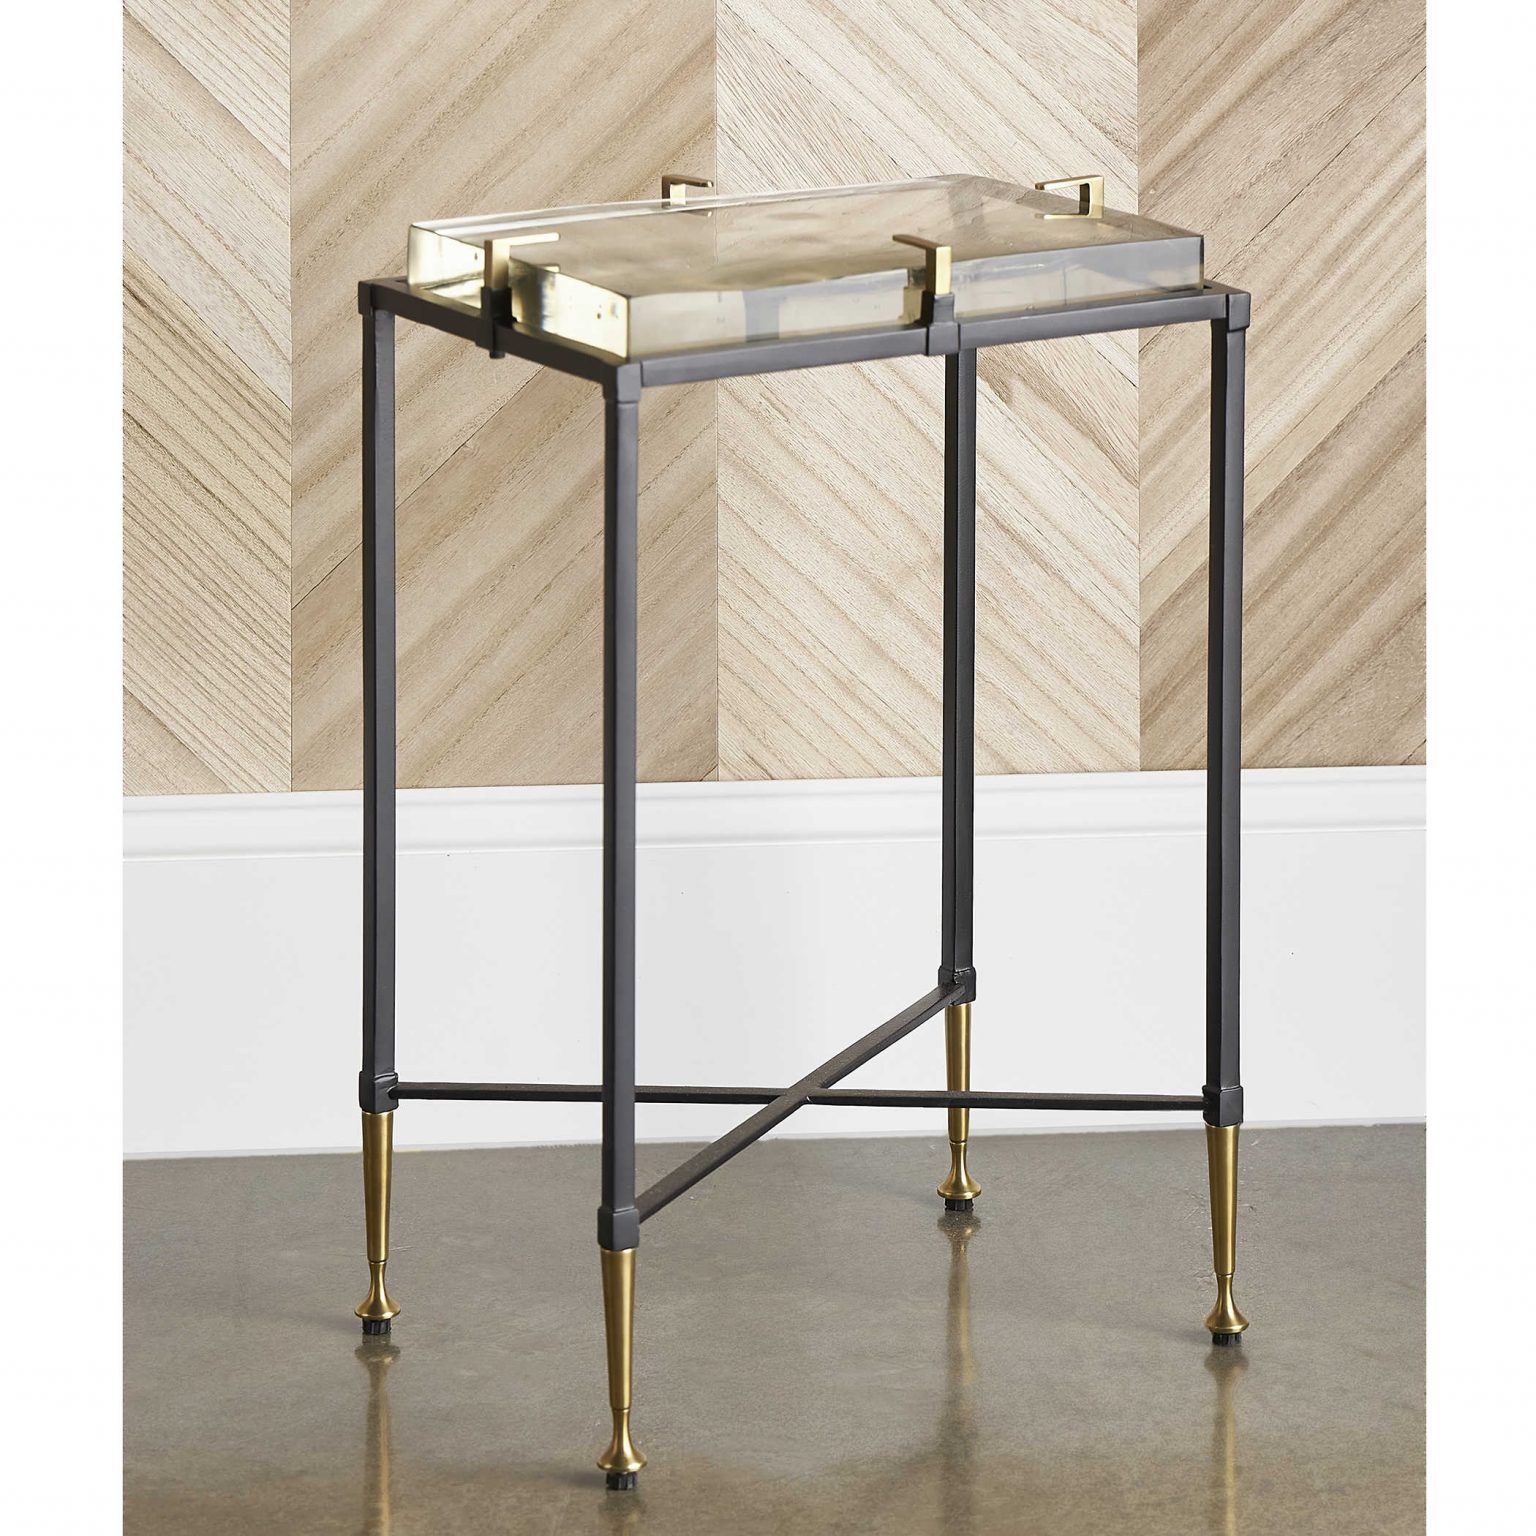 Retro-inspired accent table with brass and lucite details